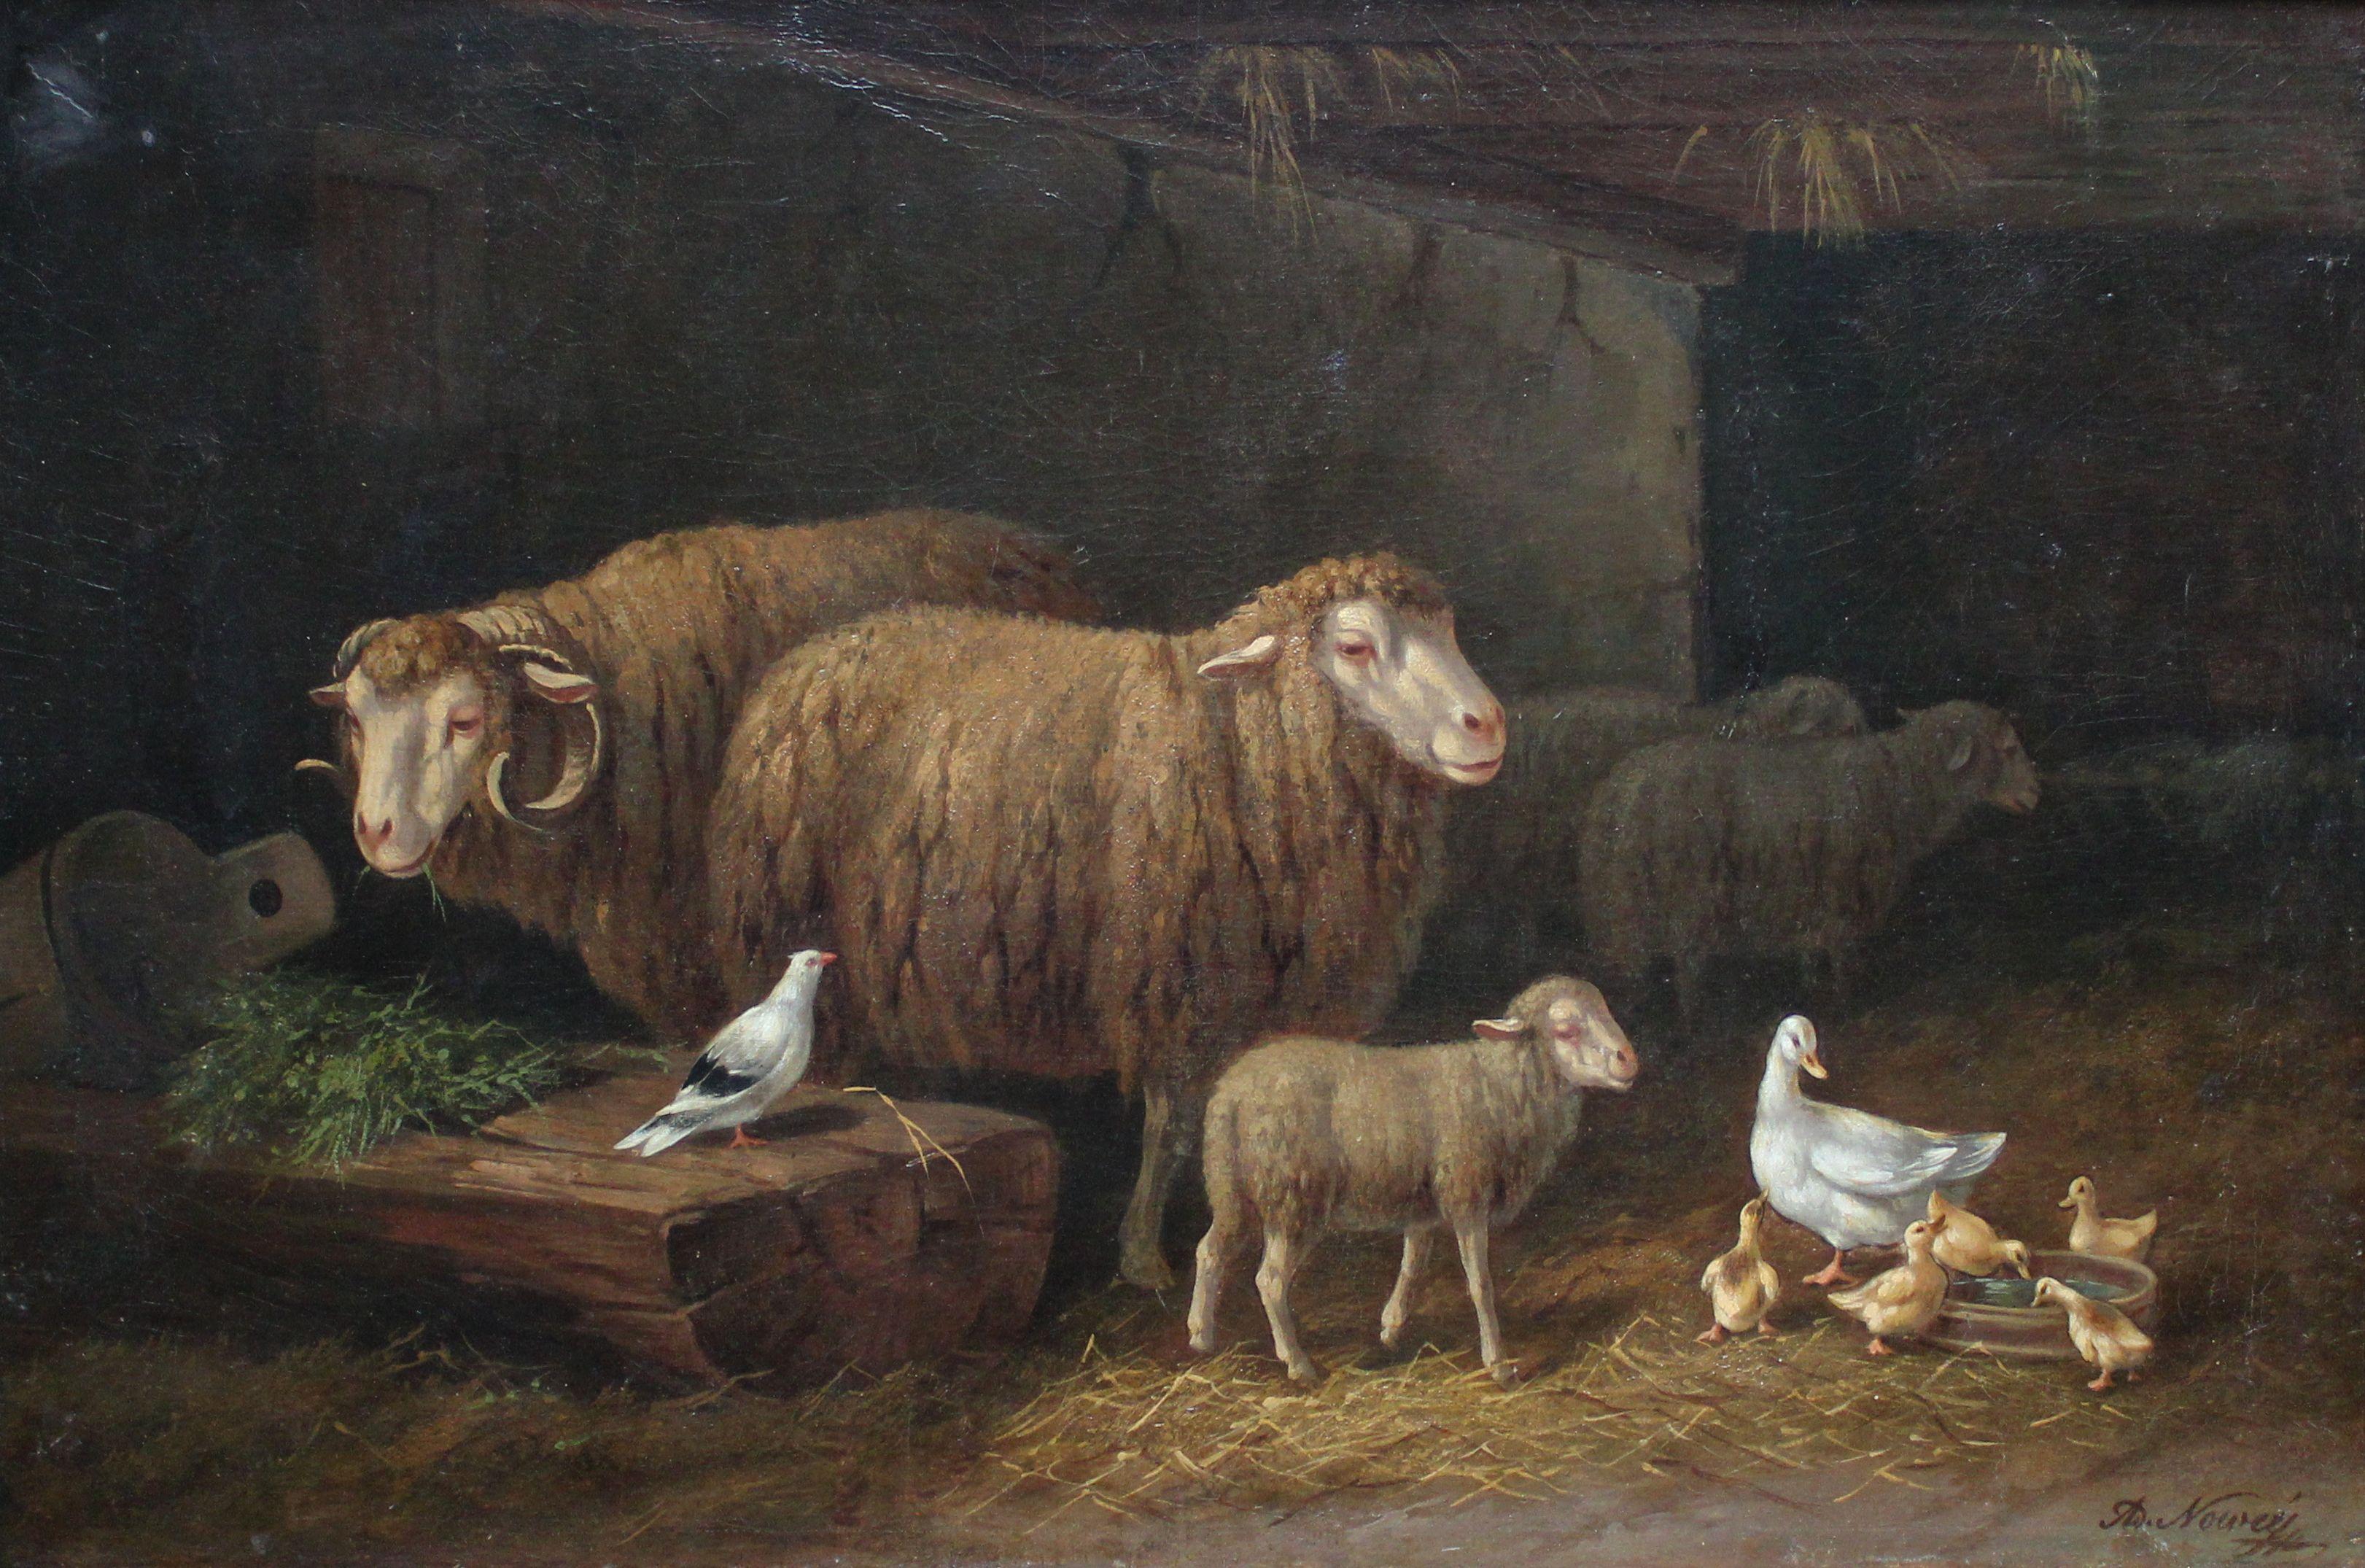 Sheep in the barn. Oil on canvas, 52.5x78.5 cm